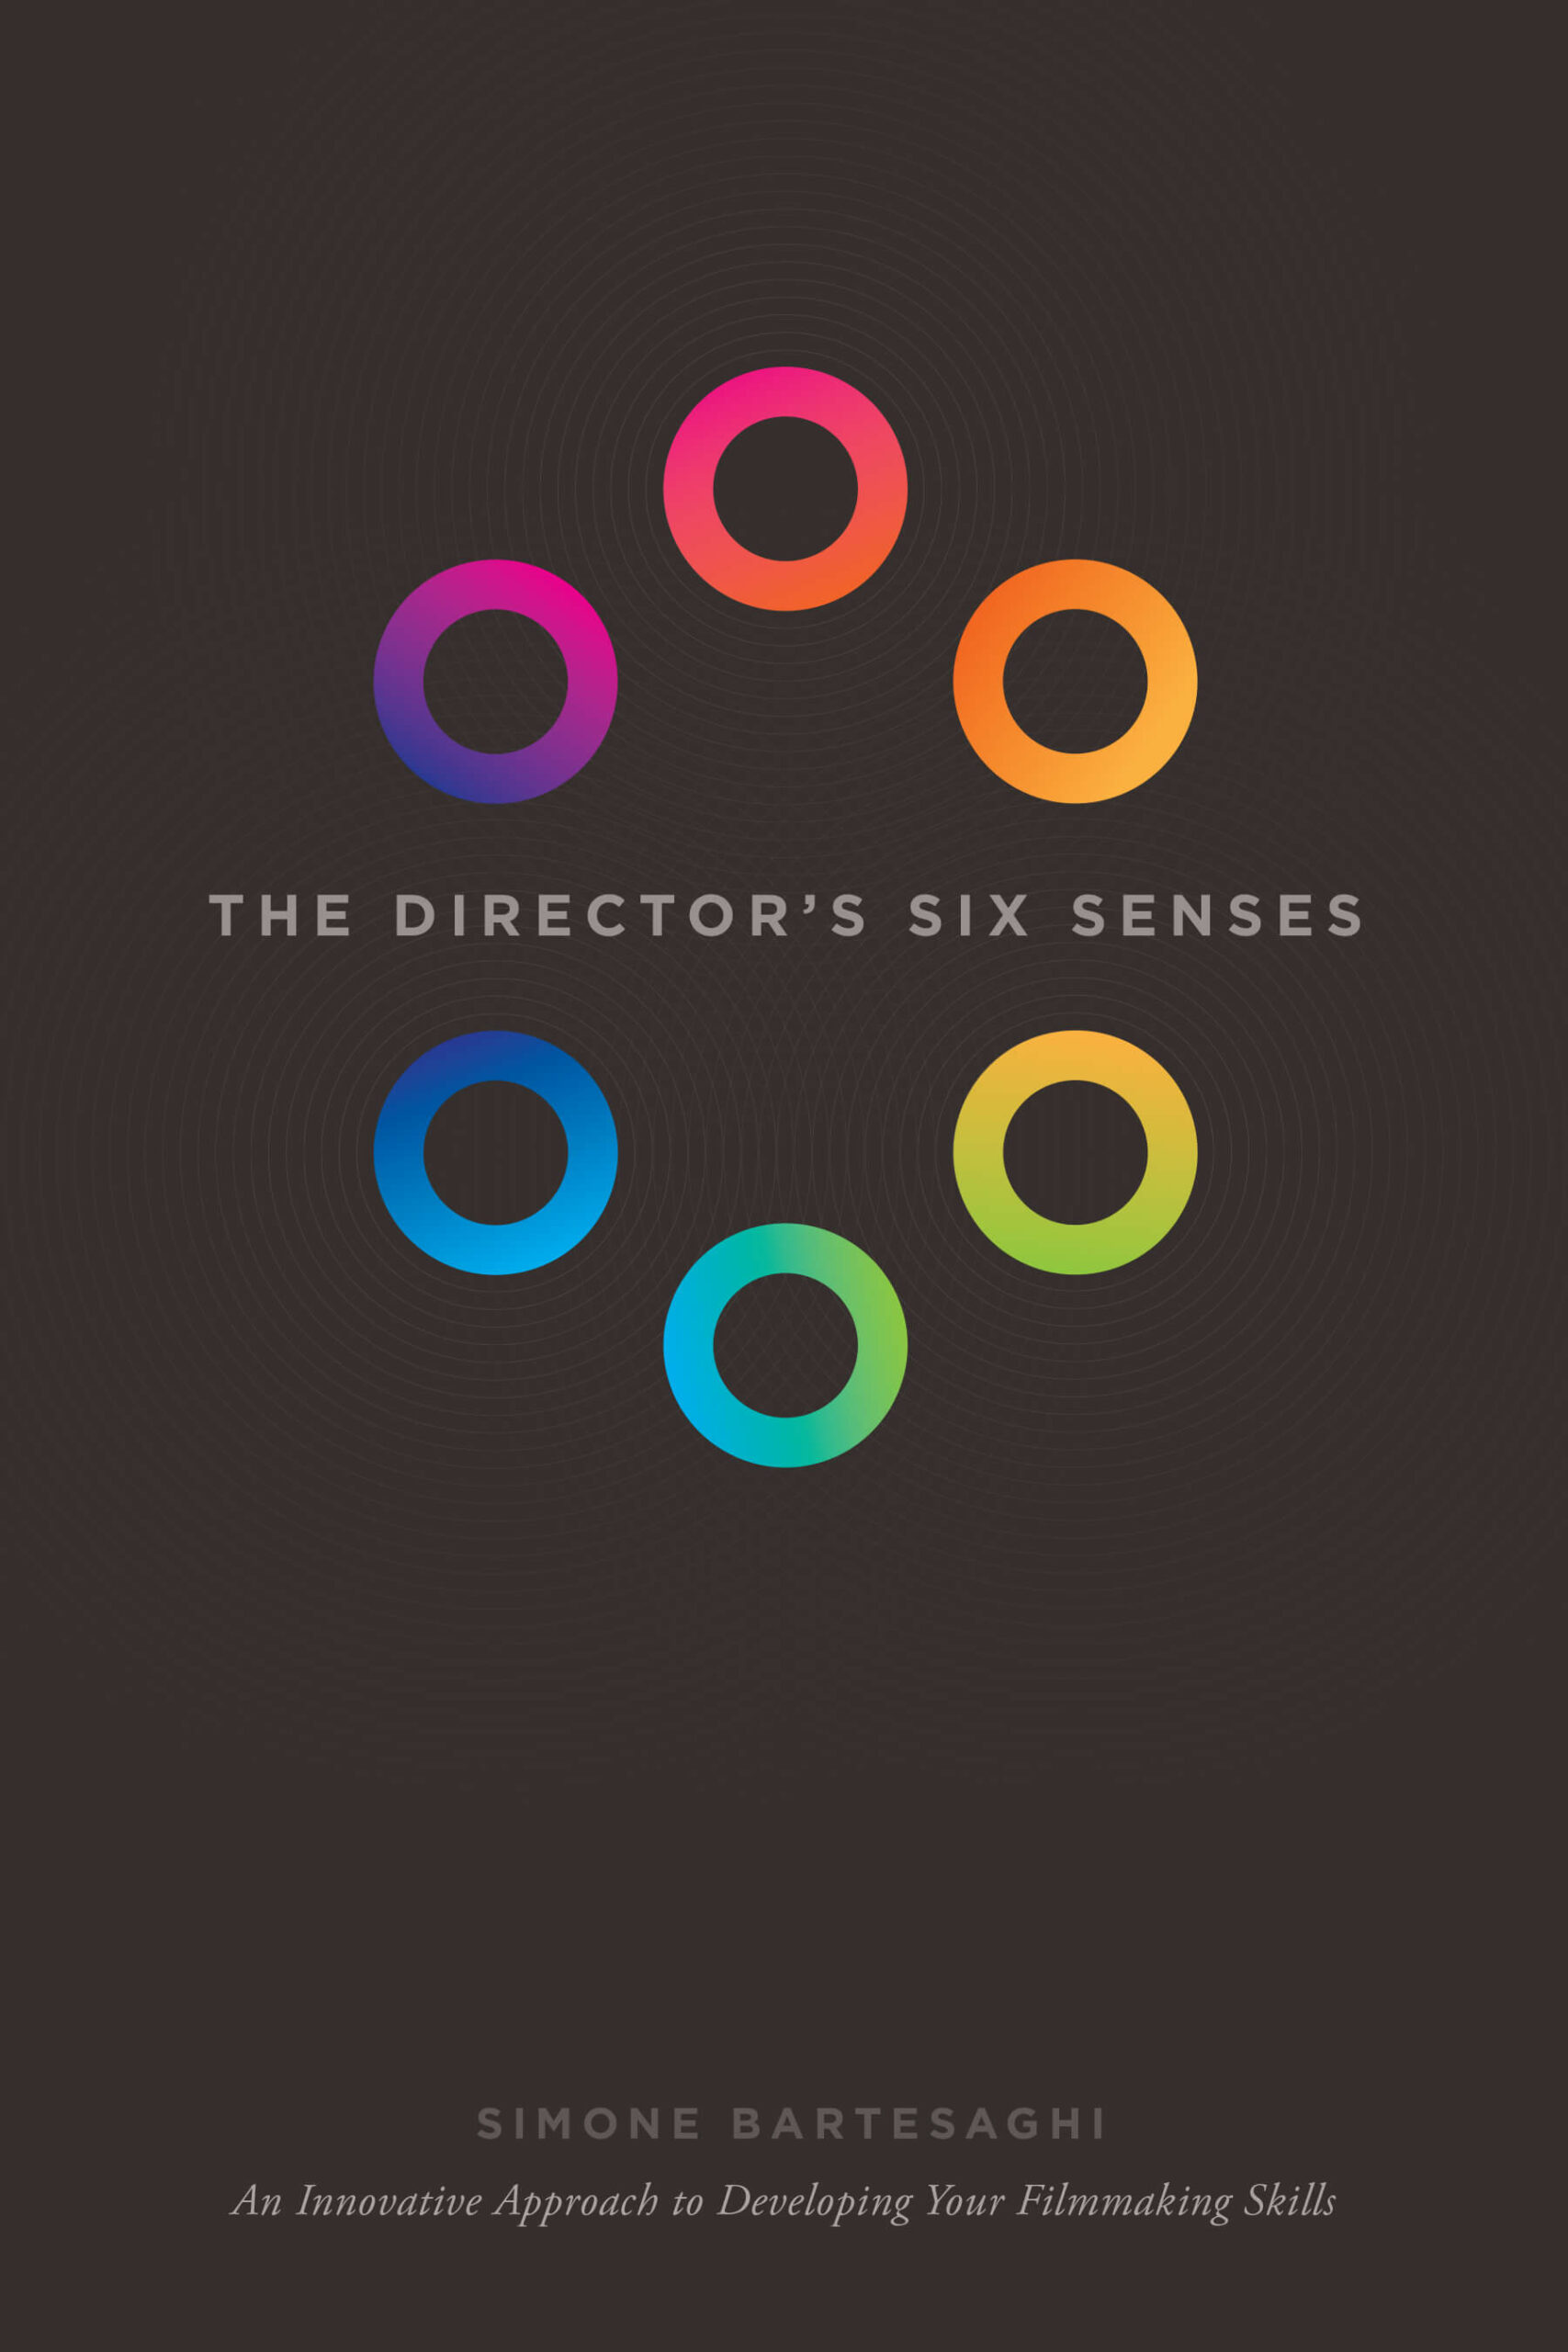 The Director’s Six Senses: An Innovative Approach to Developing Your Filmmaking Skills